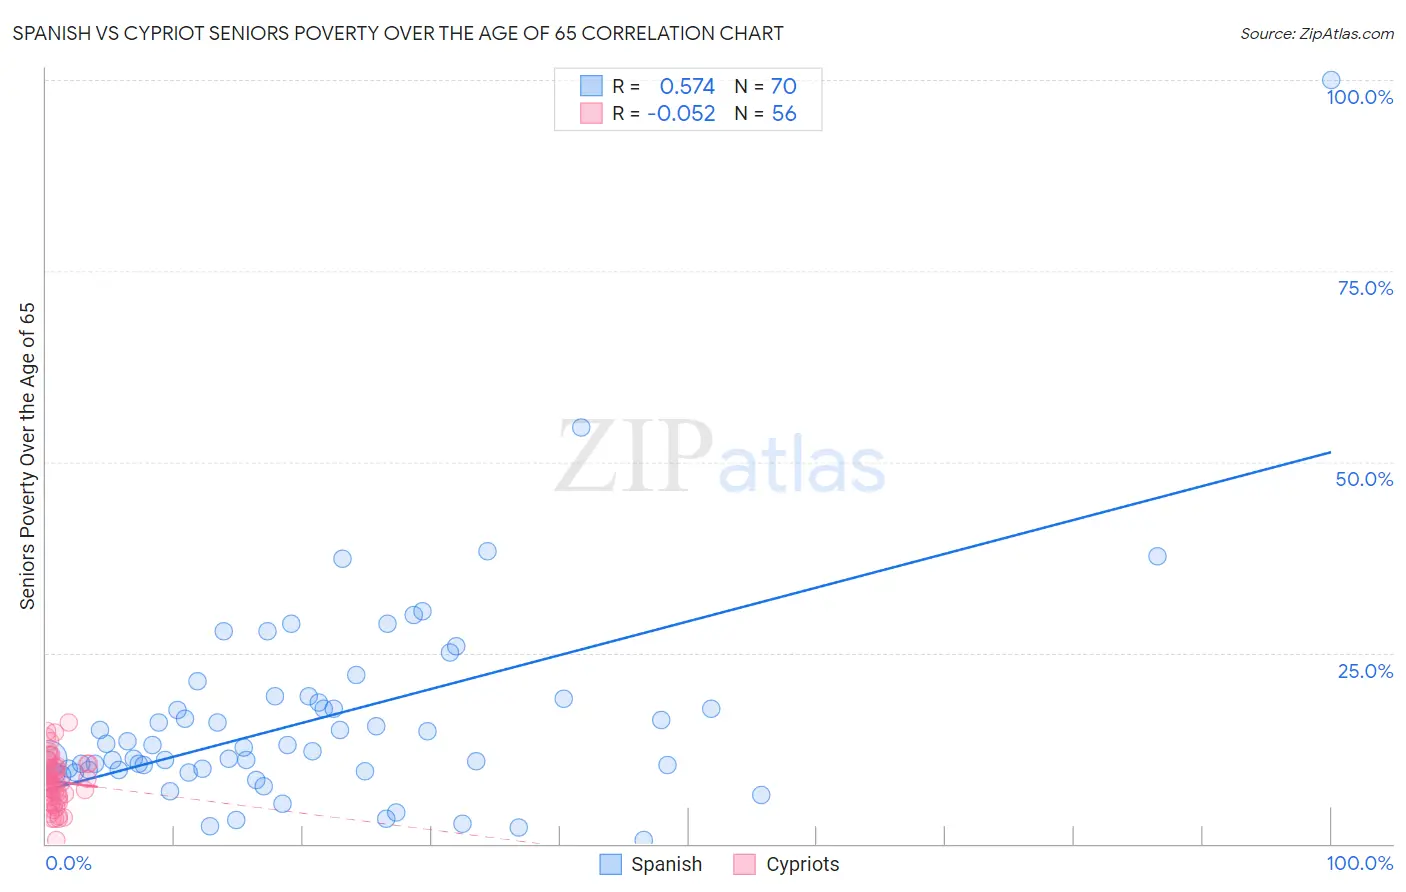 Spanish vs Cypriot Seniors Poverty Over the Age of 65